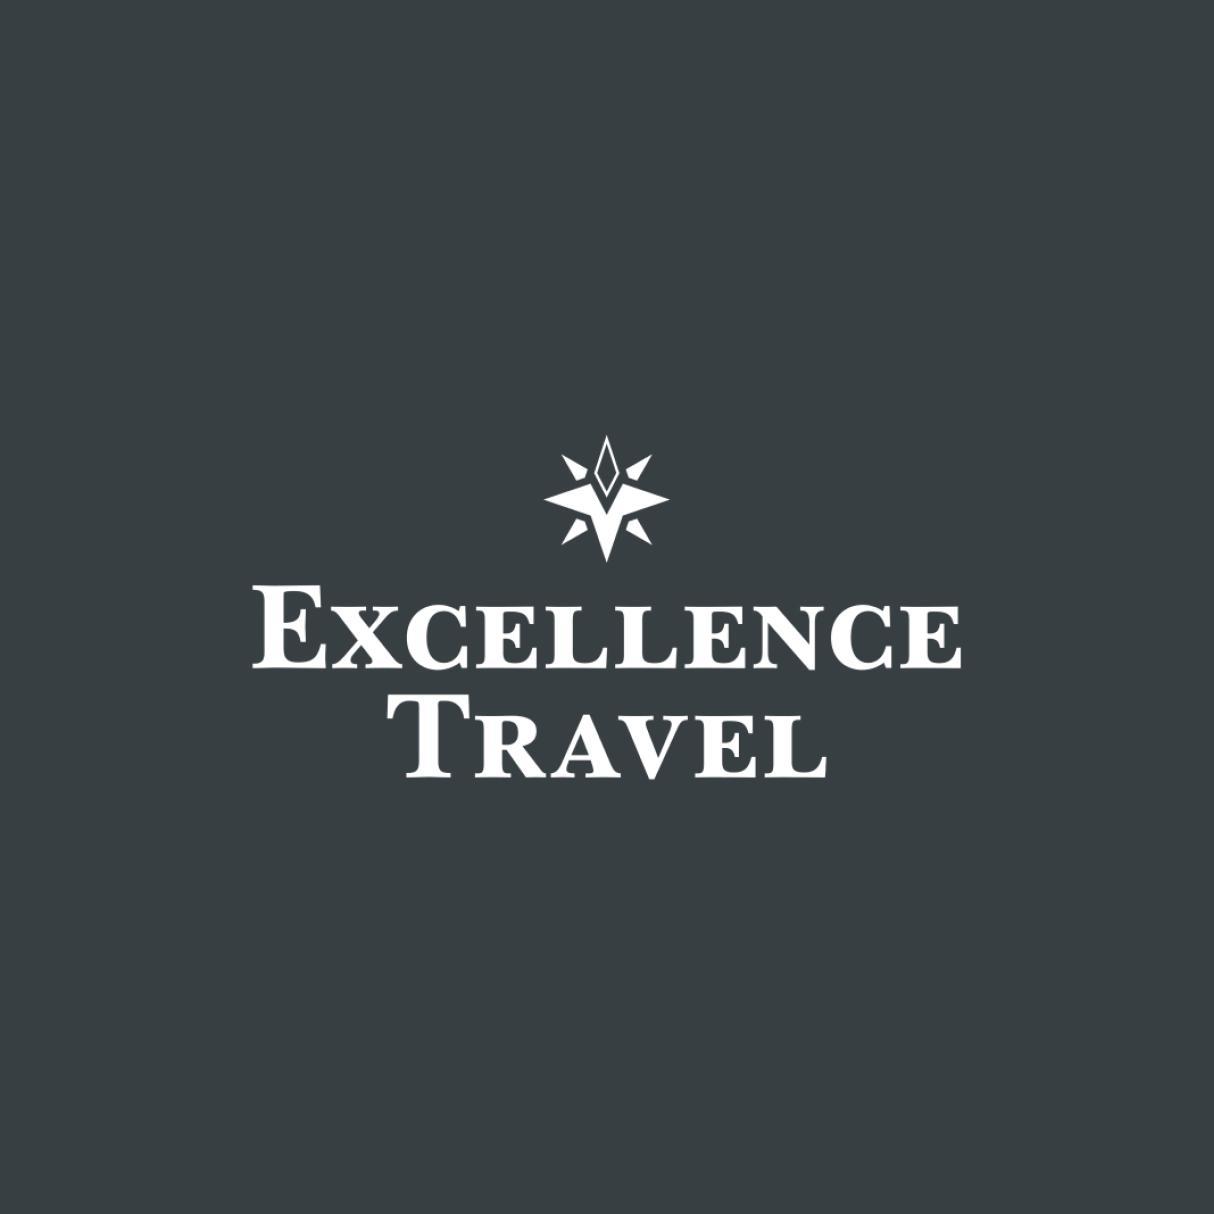 Excellence Travel logo